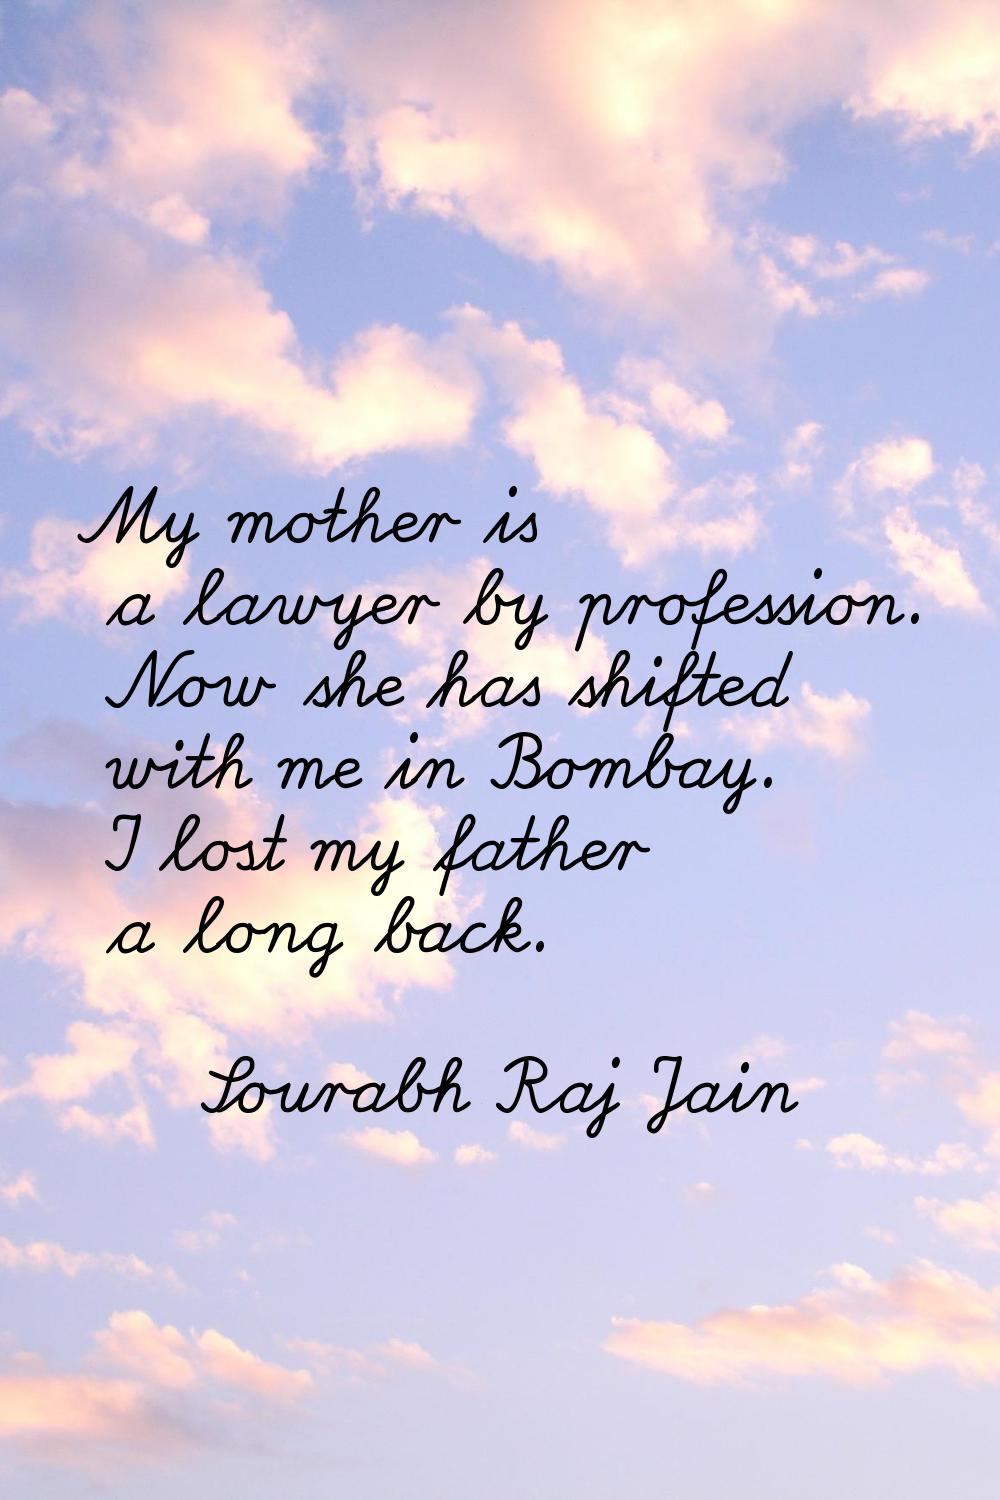 My mother is a lawyer by profession. Now she has shifted with me in Bombay. I lost my father a long